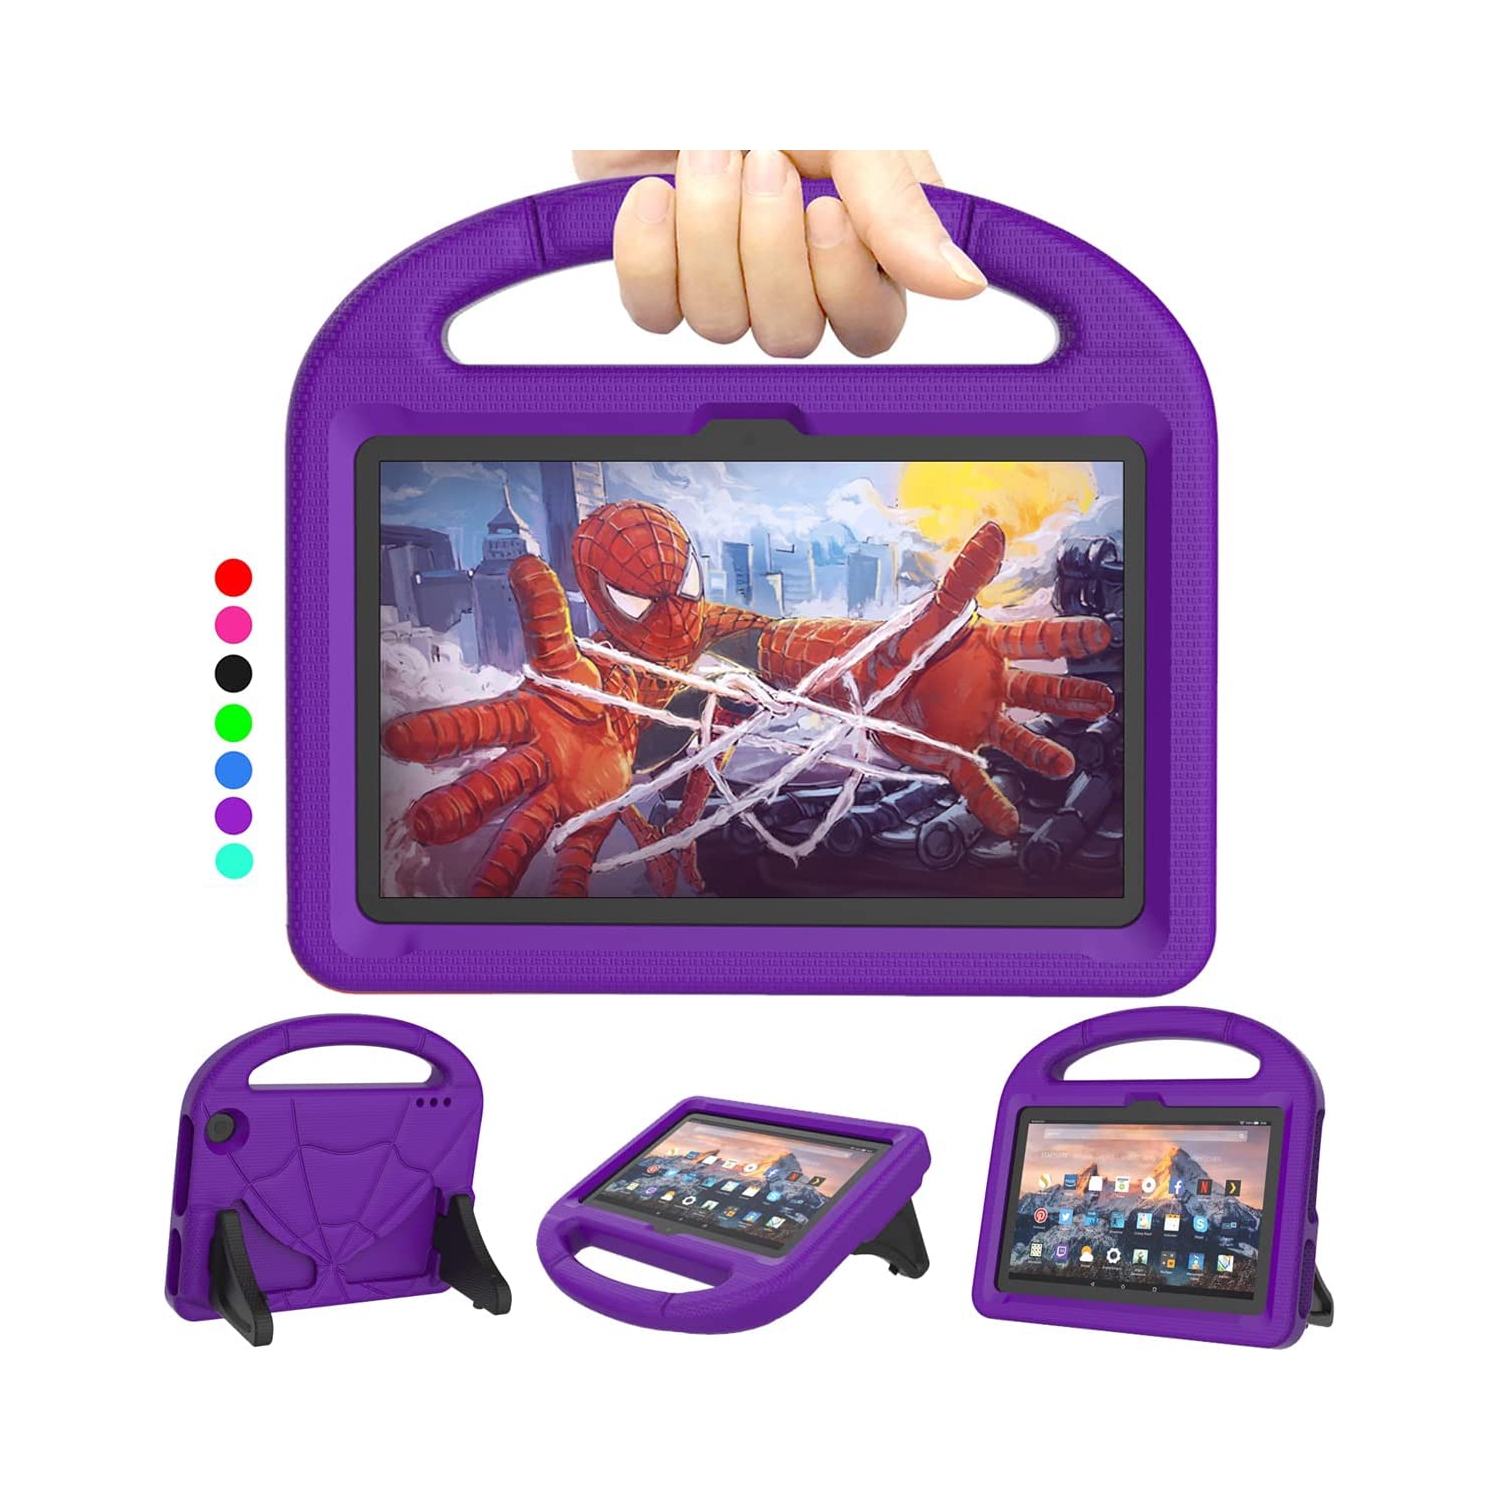 New Fire 7 Tablet Case for Kids 2022 Release (12th Generation) L Fire Tablet 7 Case with Handle Stand Lightweight Durable Shockproof Kid-Proof Cover for Fire 7 Tablet/Kids Tablet 2